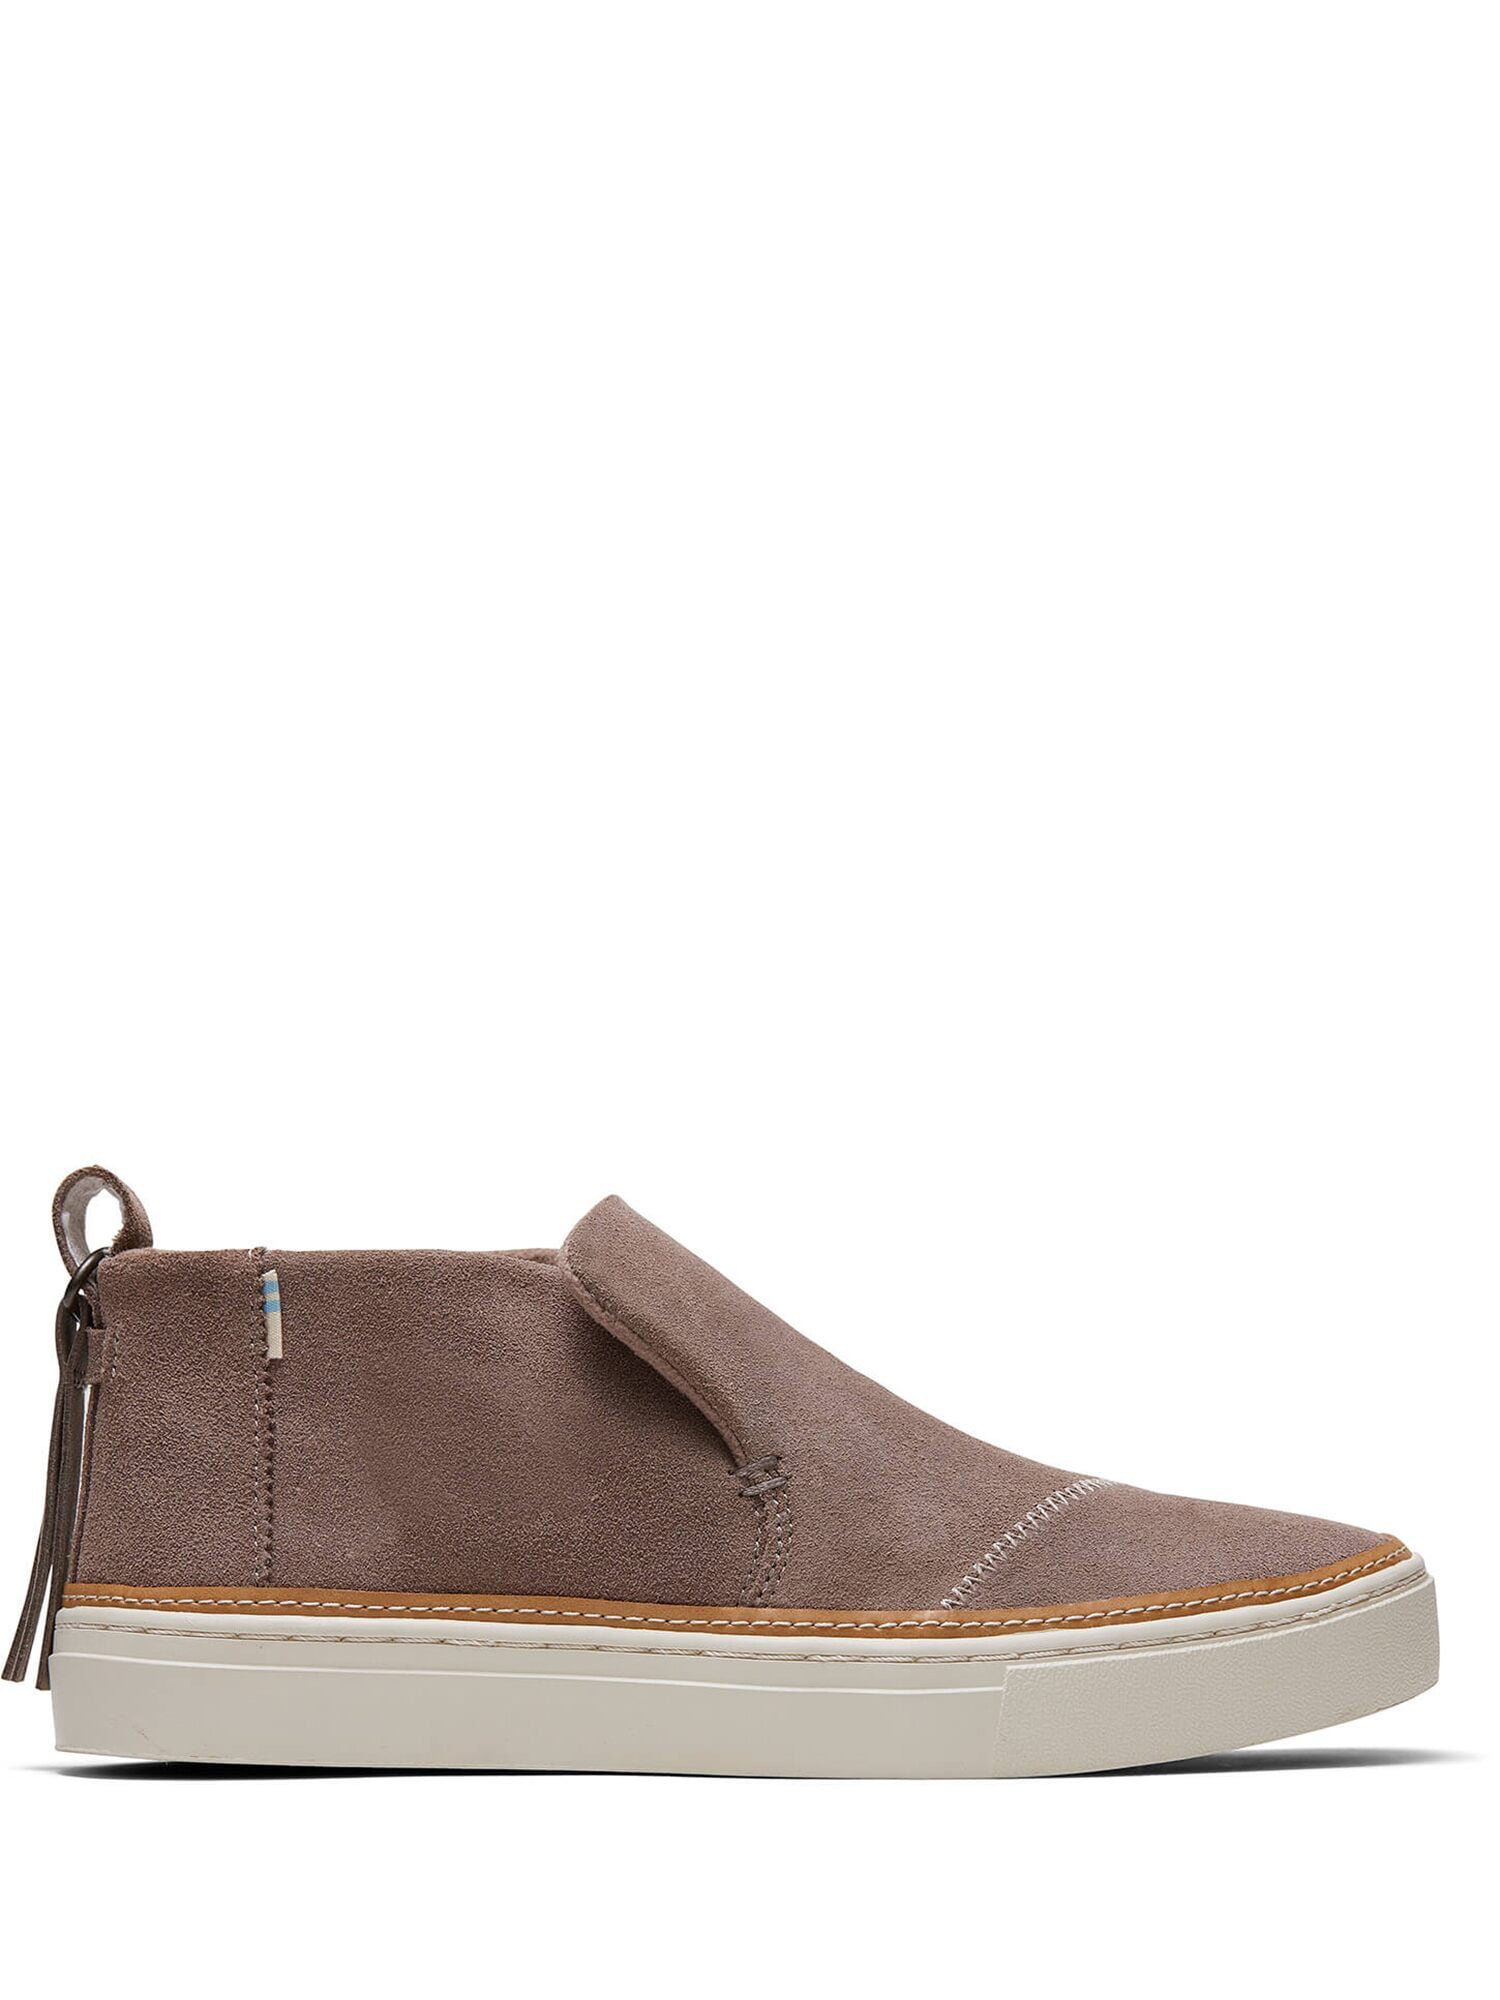 shade heritage canvas women's carmel sneakers topanga collection